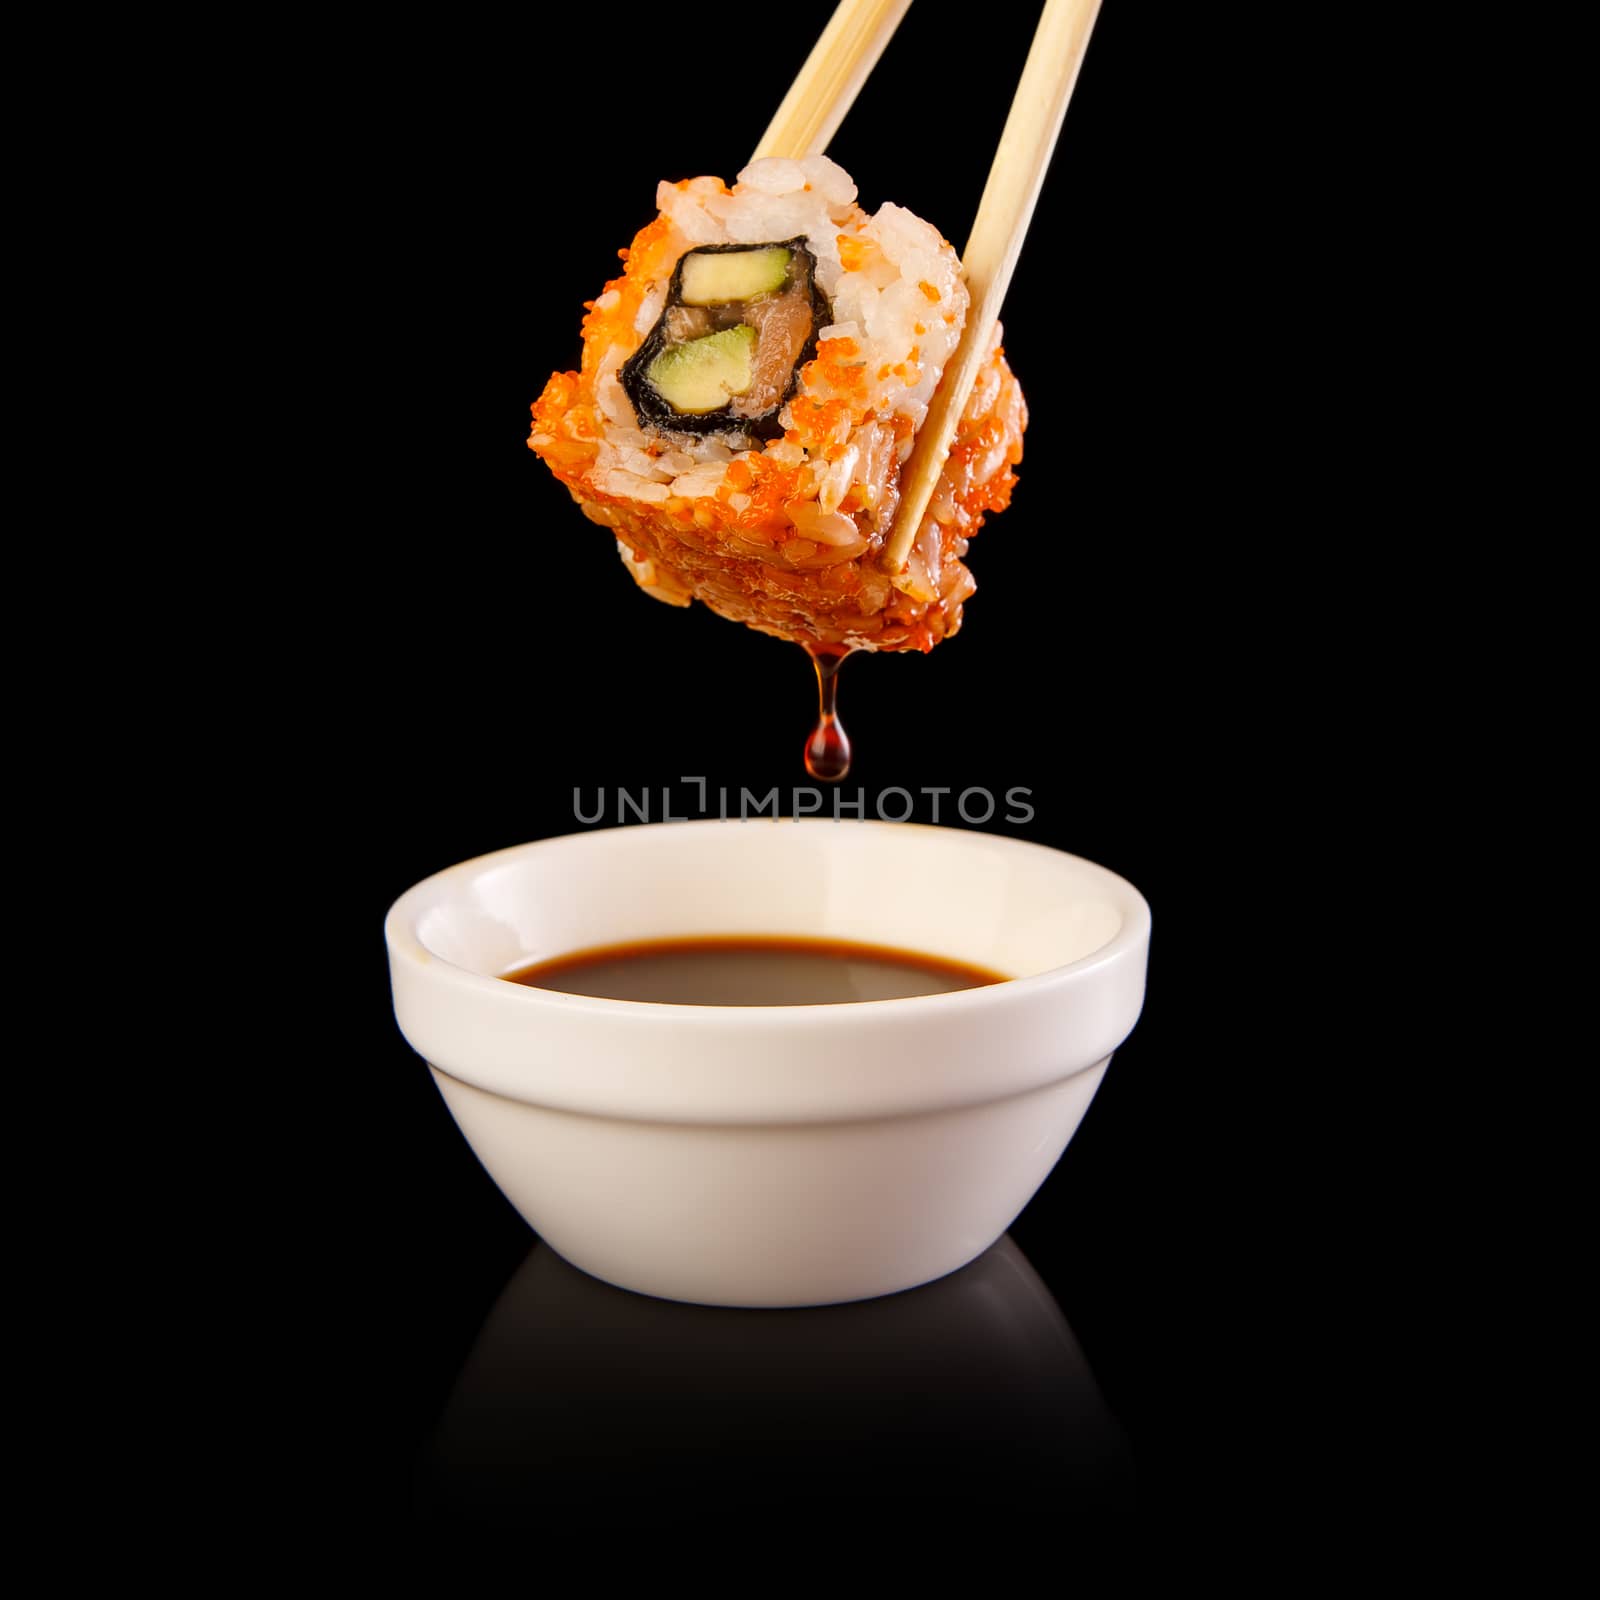 Roll the delicious sushi on a black background.